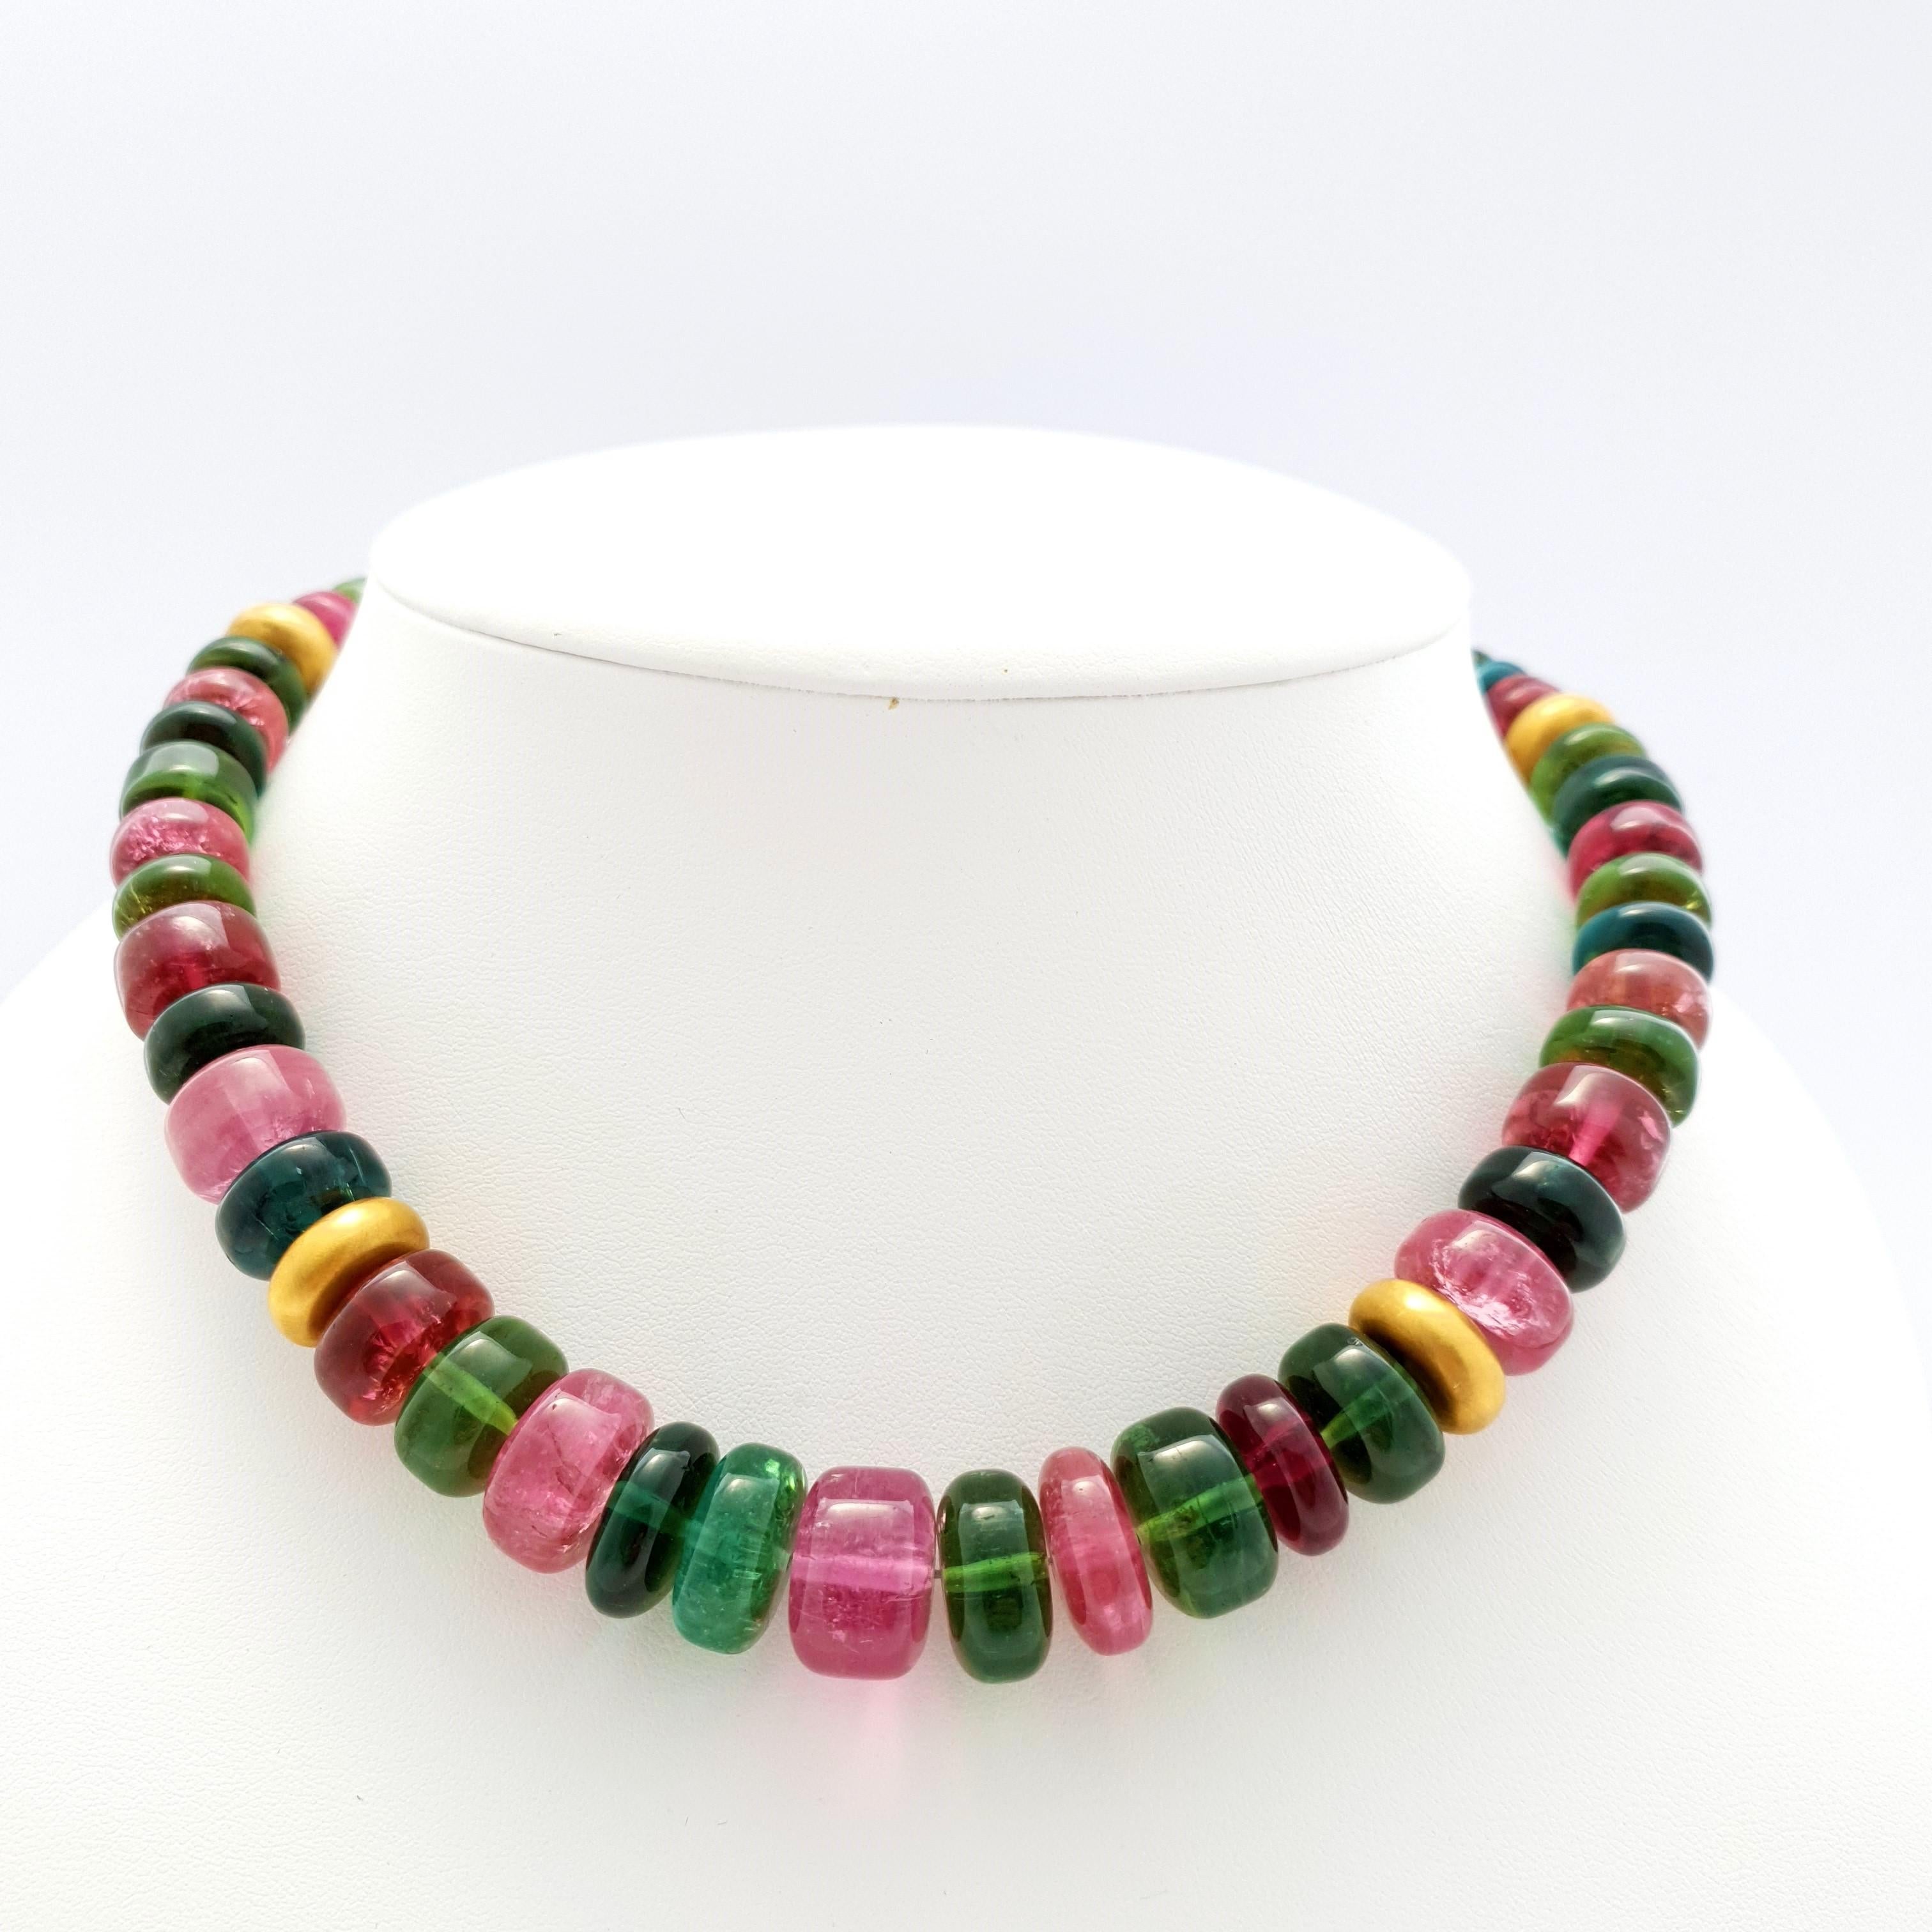 This Natural Multicolour Tourmaline Rondel Beaded Necklace with 18 Carat Mat Yellow Gold is totally handmade. Cutting as well as goldwork are made in German quality. The screw clasp is easy to handle and very secure. The colorful tourmalines go very